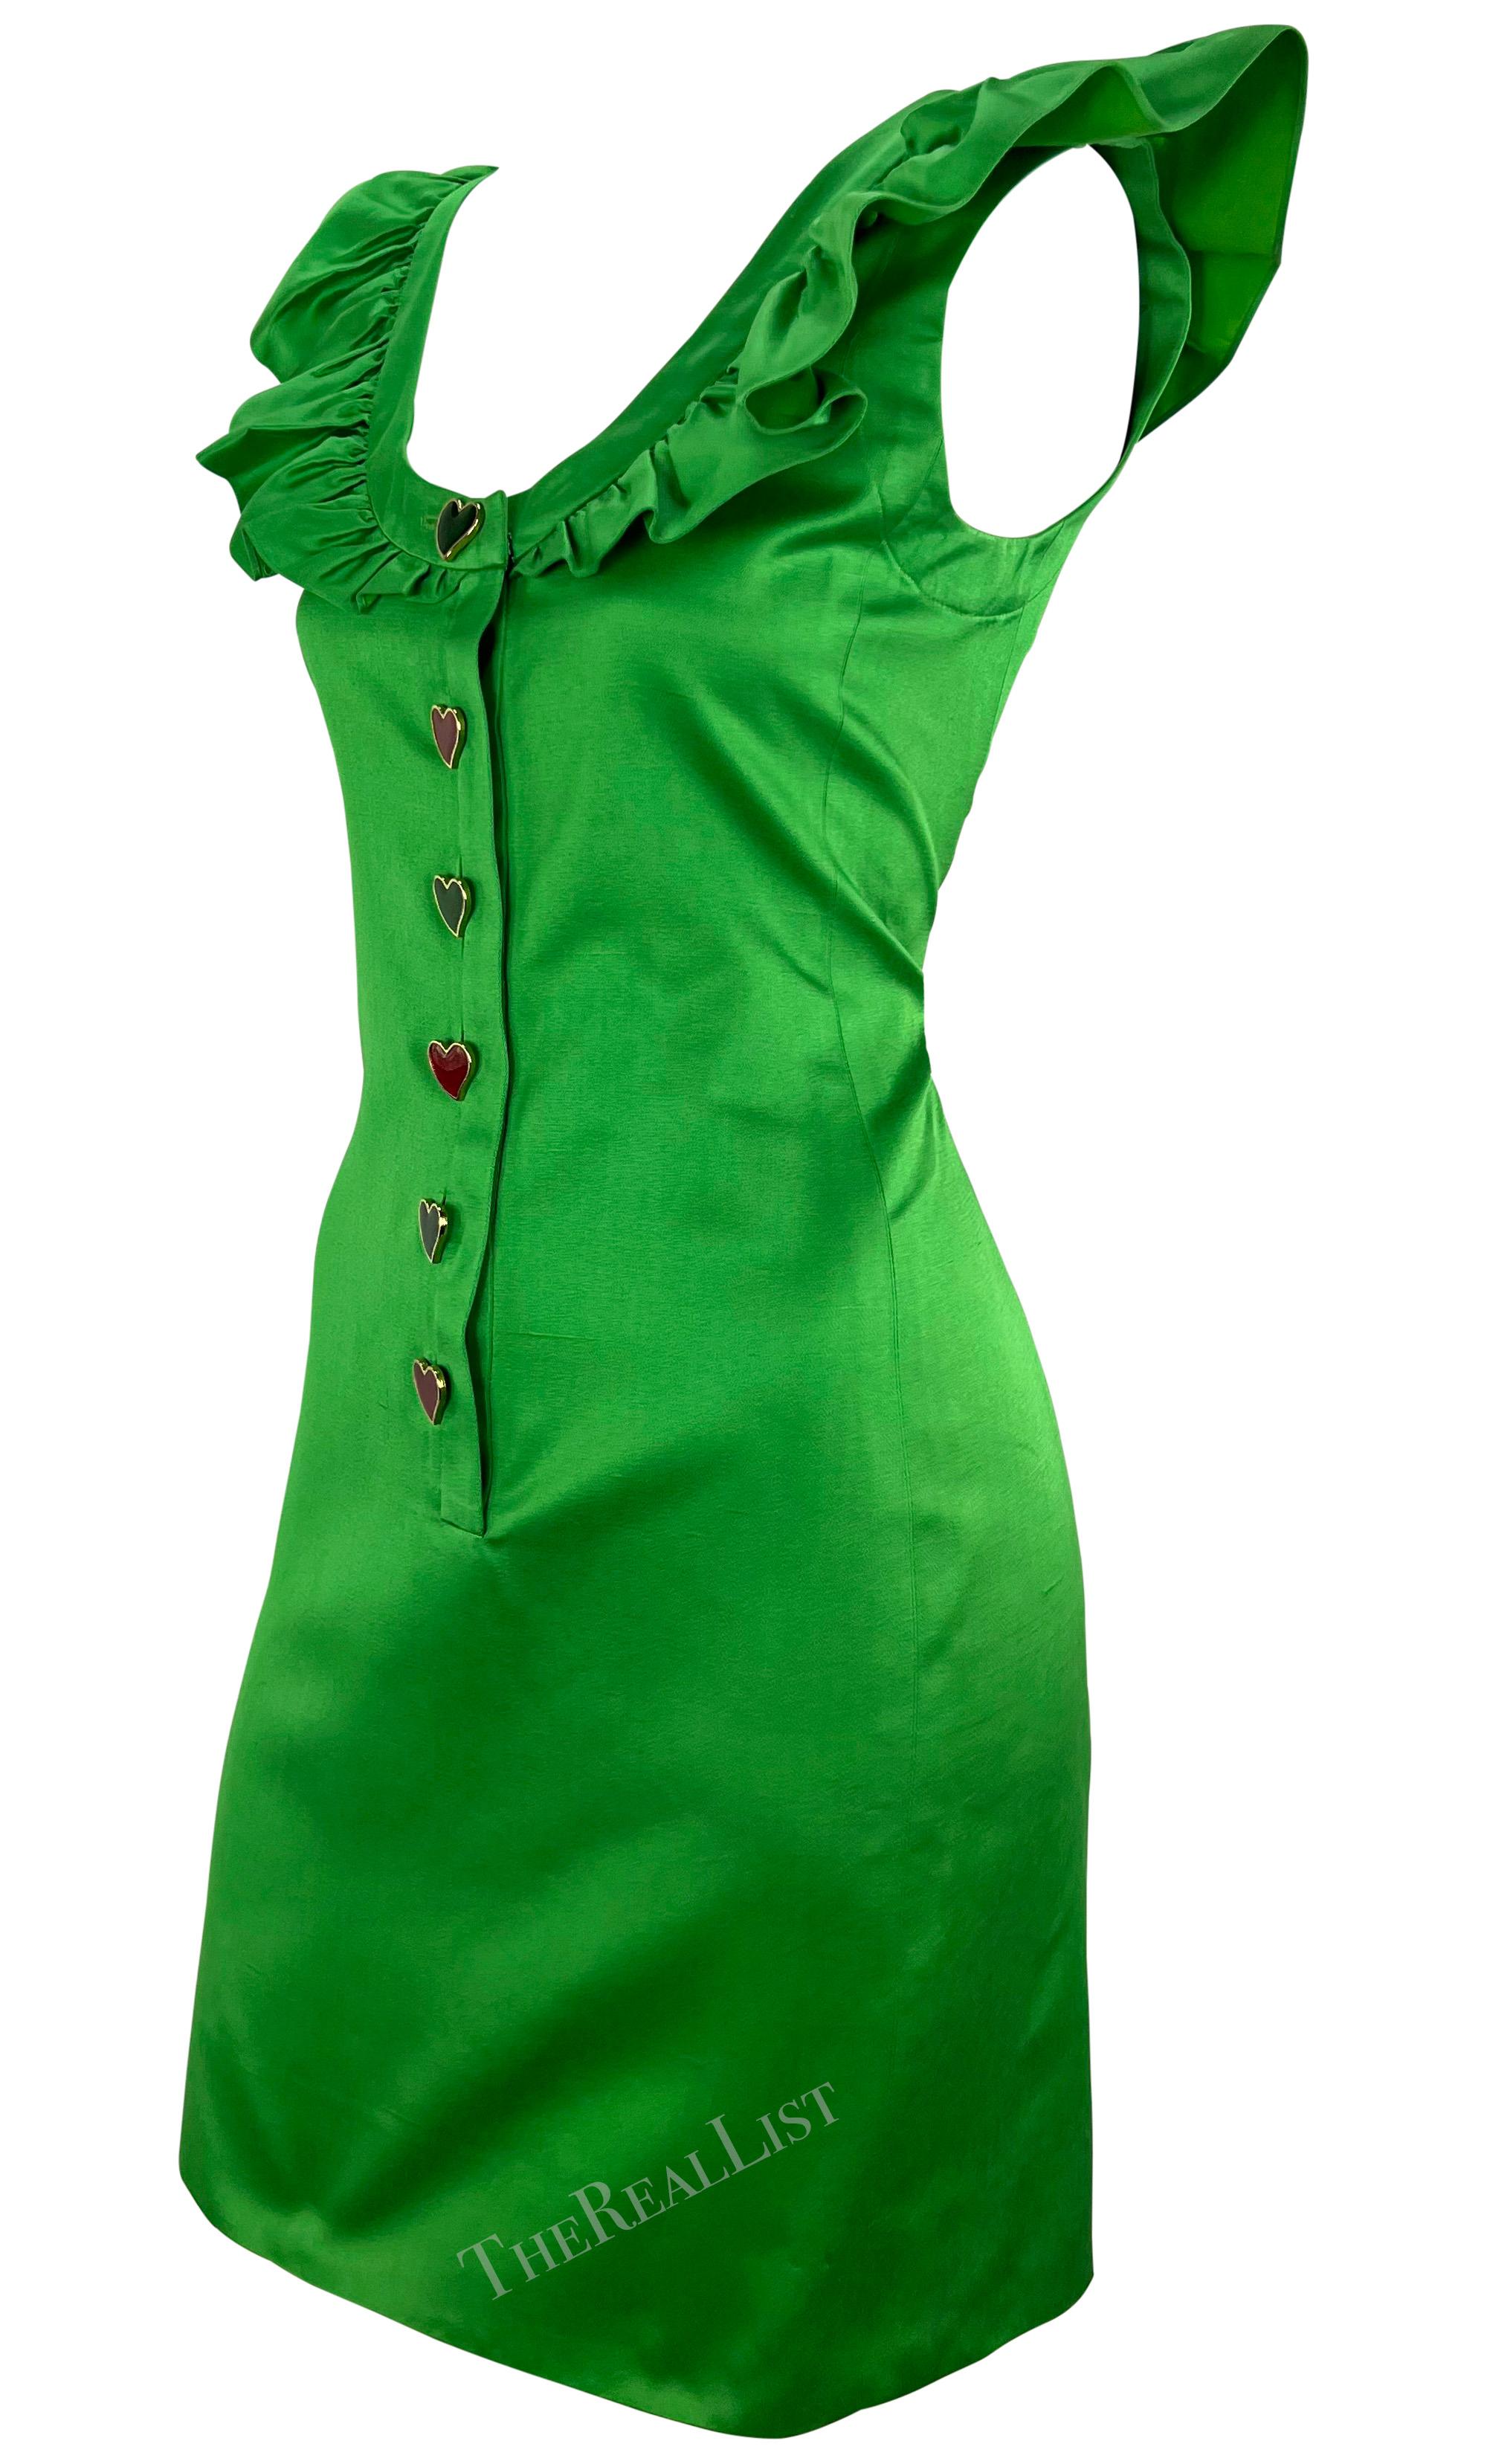 S/S 1992 Yves Saint Laurent Runway Ad Bright Green Ruffle Heart Button Dress For Sale 2